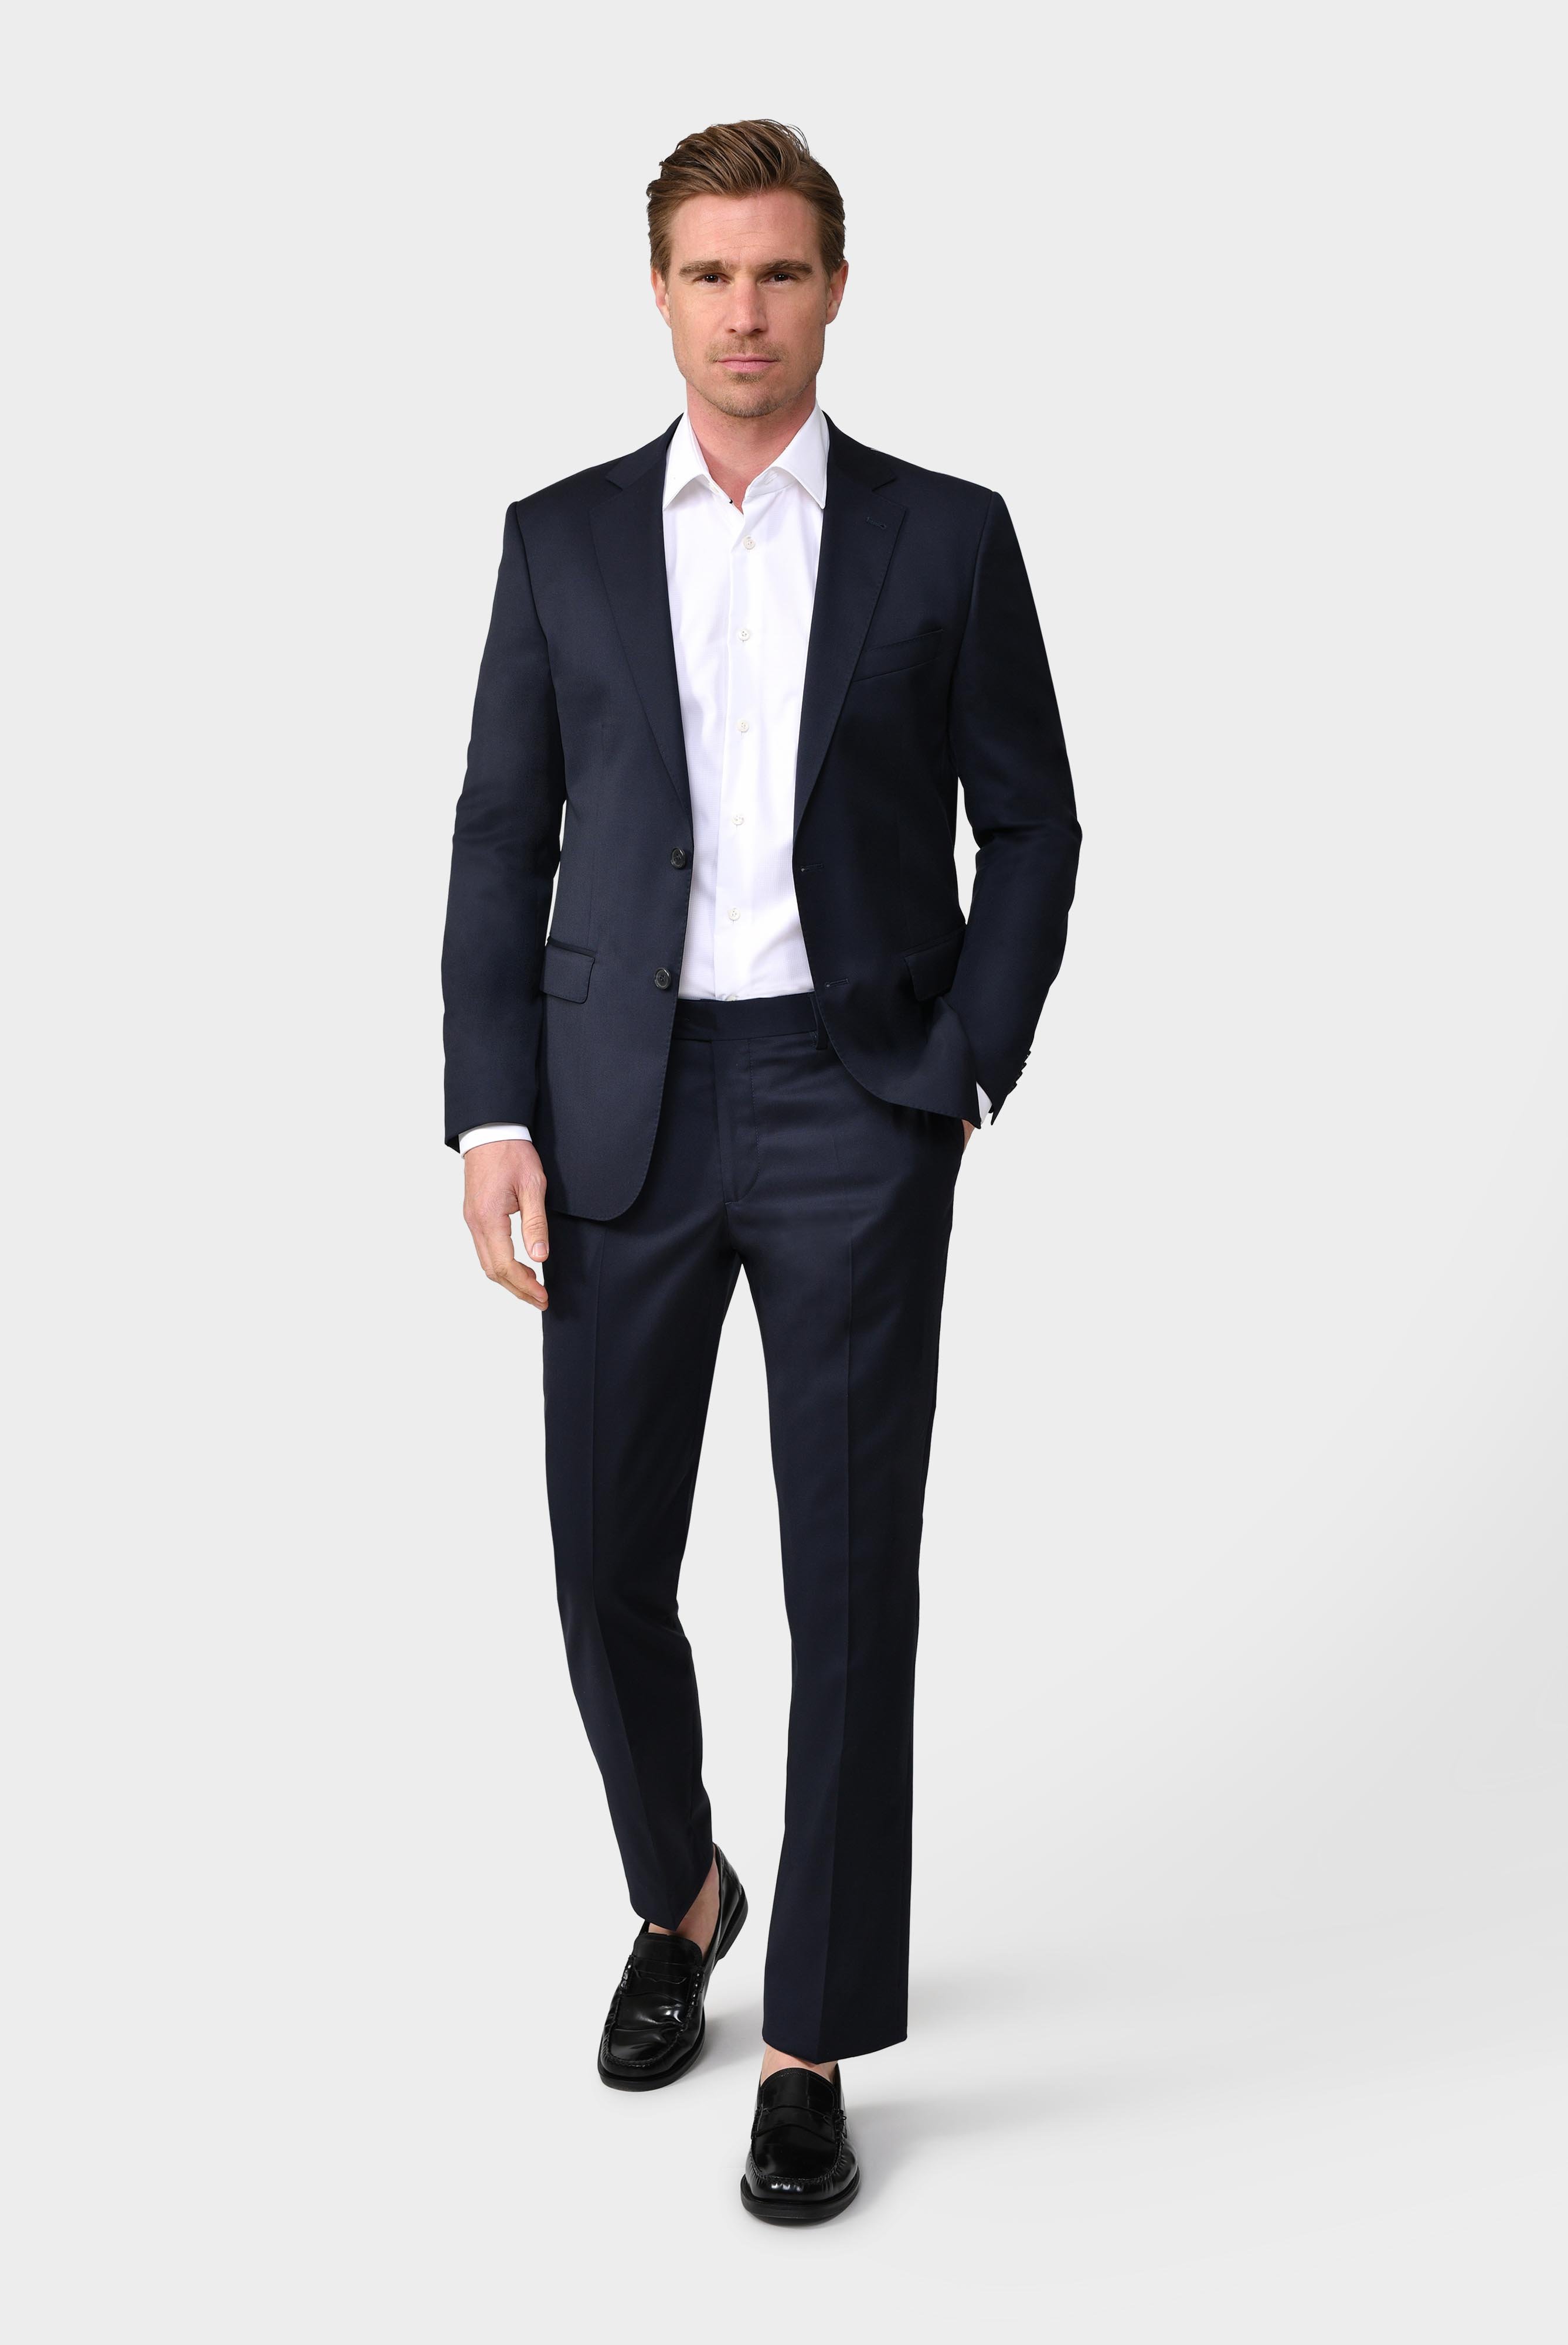 Jeans & Trousers+Men''s pants made of merino wool+80.7804.16.H01000.780.48